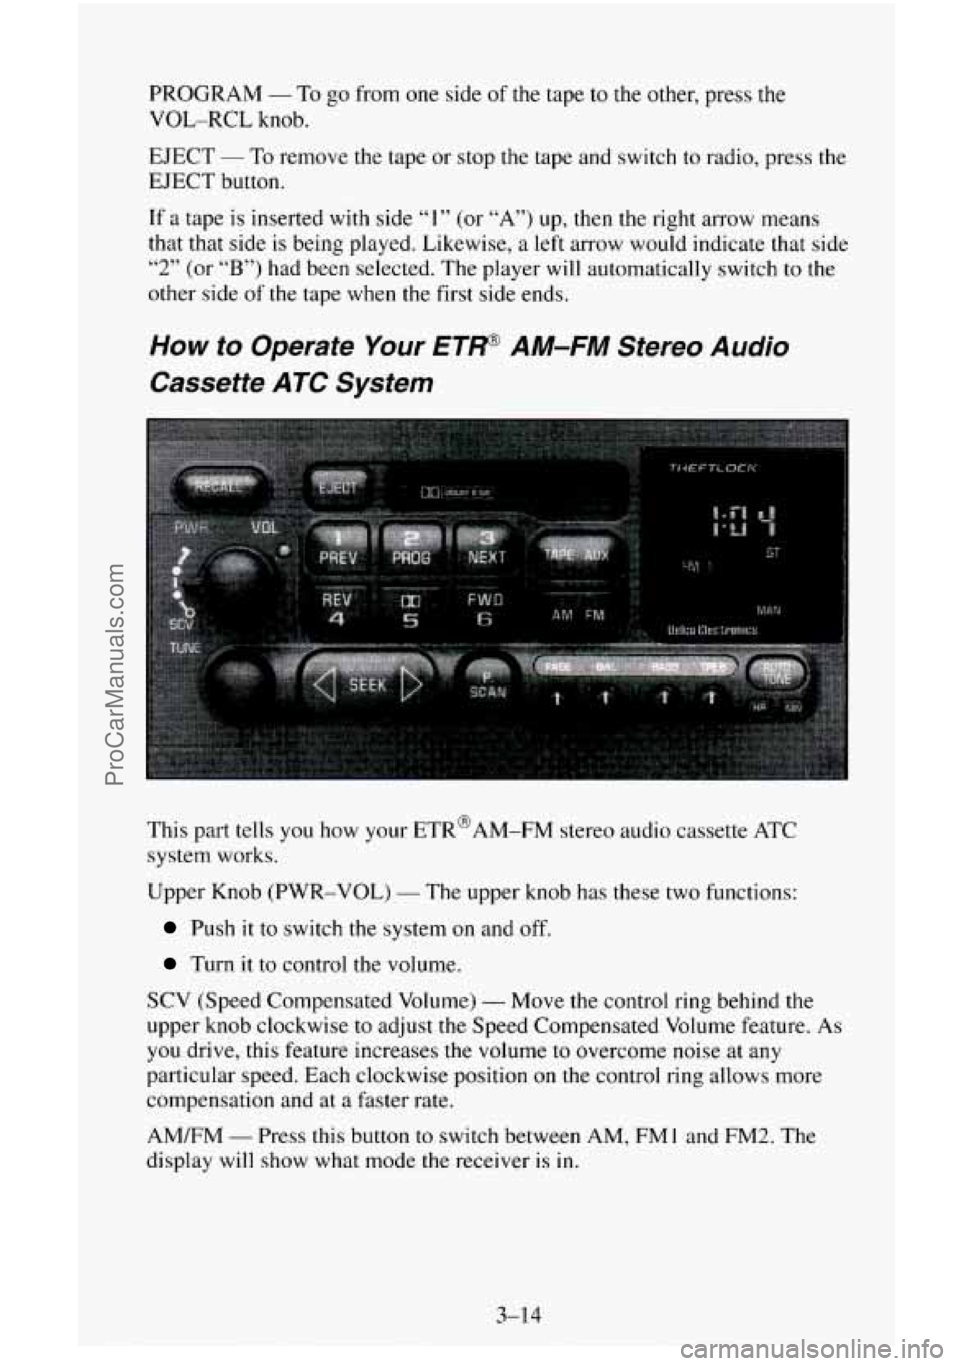 CHEVROLET SUBURBAN 1996  Owners Manual PROGRAM - To go from one  side  of the  tape  to  the other, press the 
VOL-RCL knob. 
EJECT - To remove the tape  or  stop the tape and switch to radio, press the 
EJECT button. 
If 
a tape  is inser